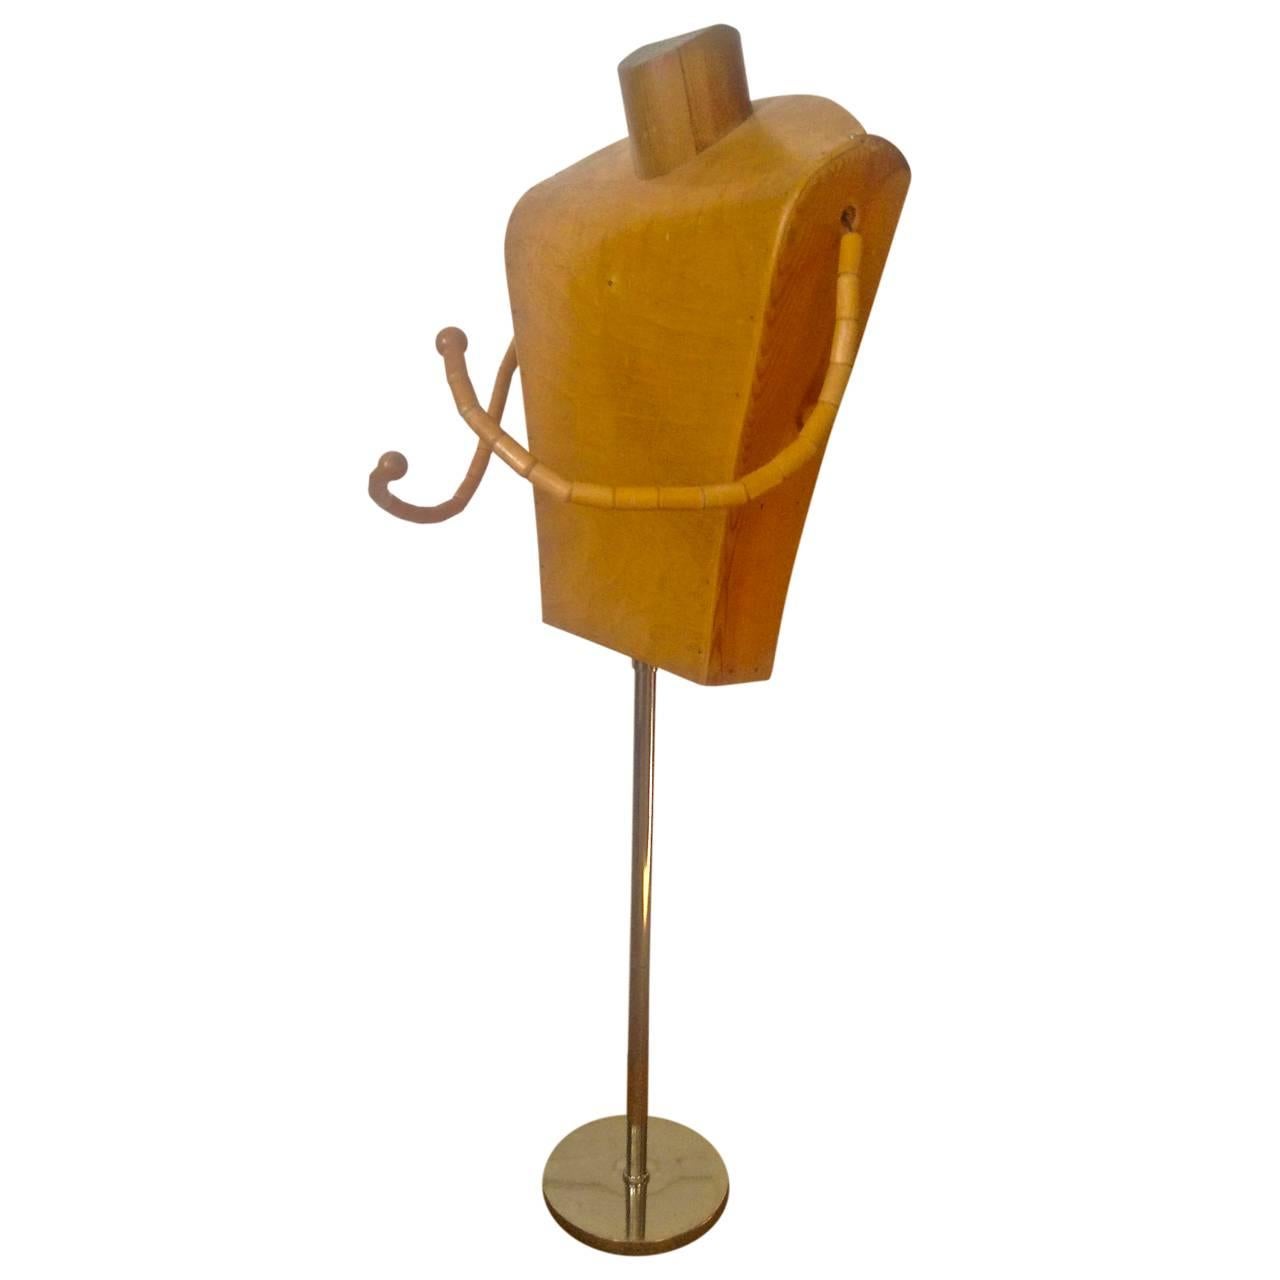 Fantastic wooden mannequin stand with bendable arms.